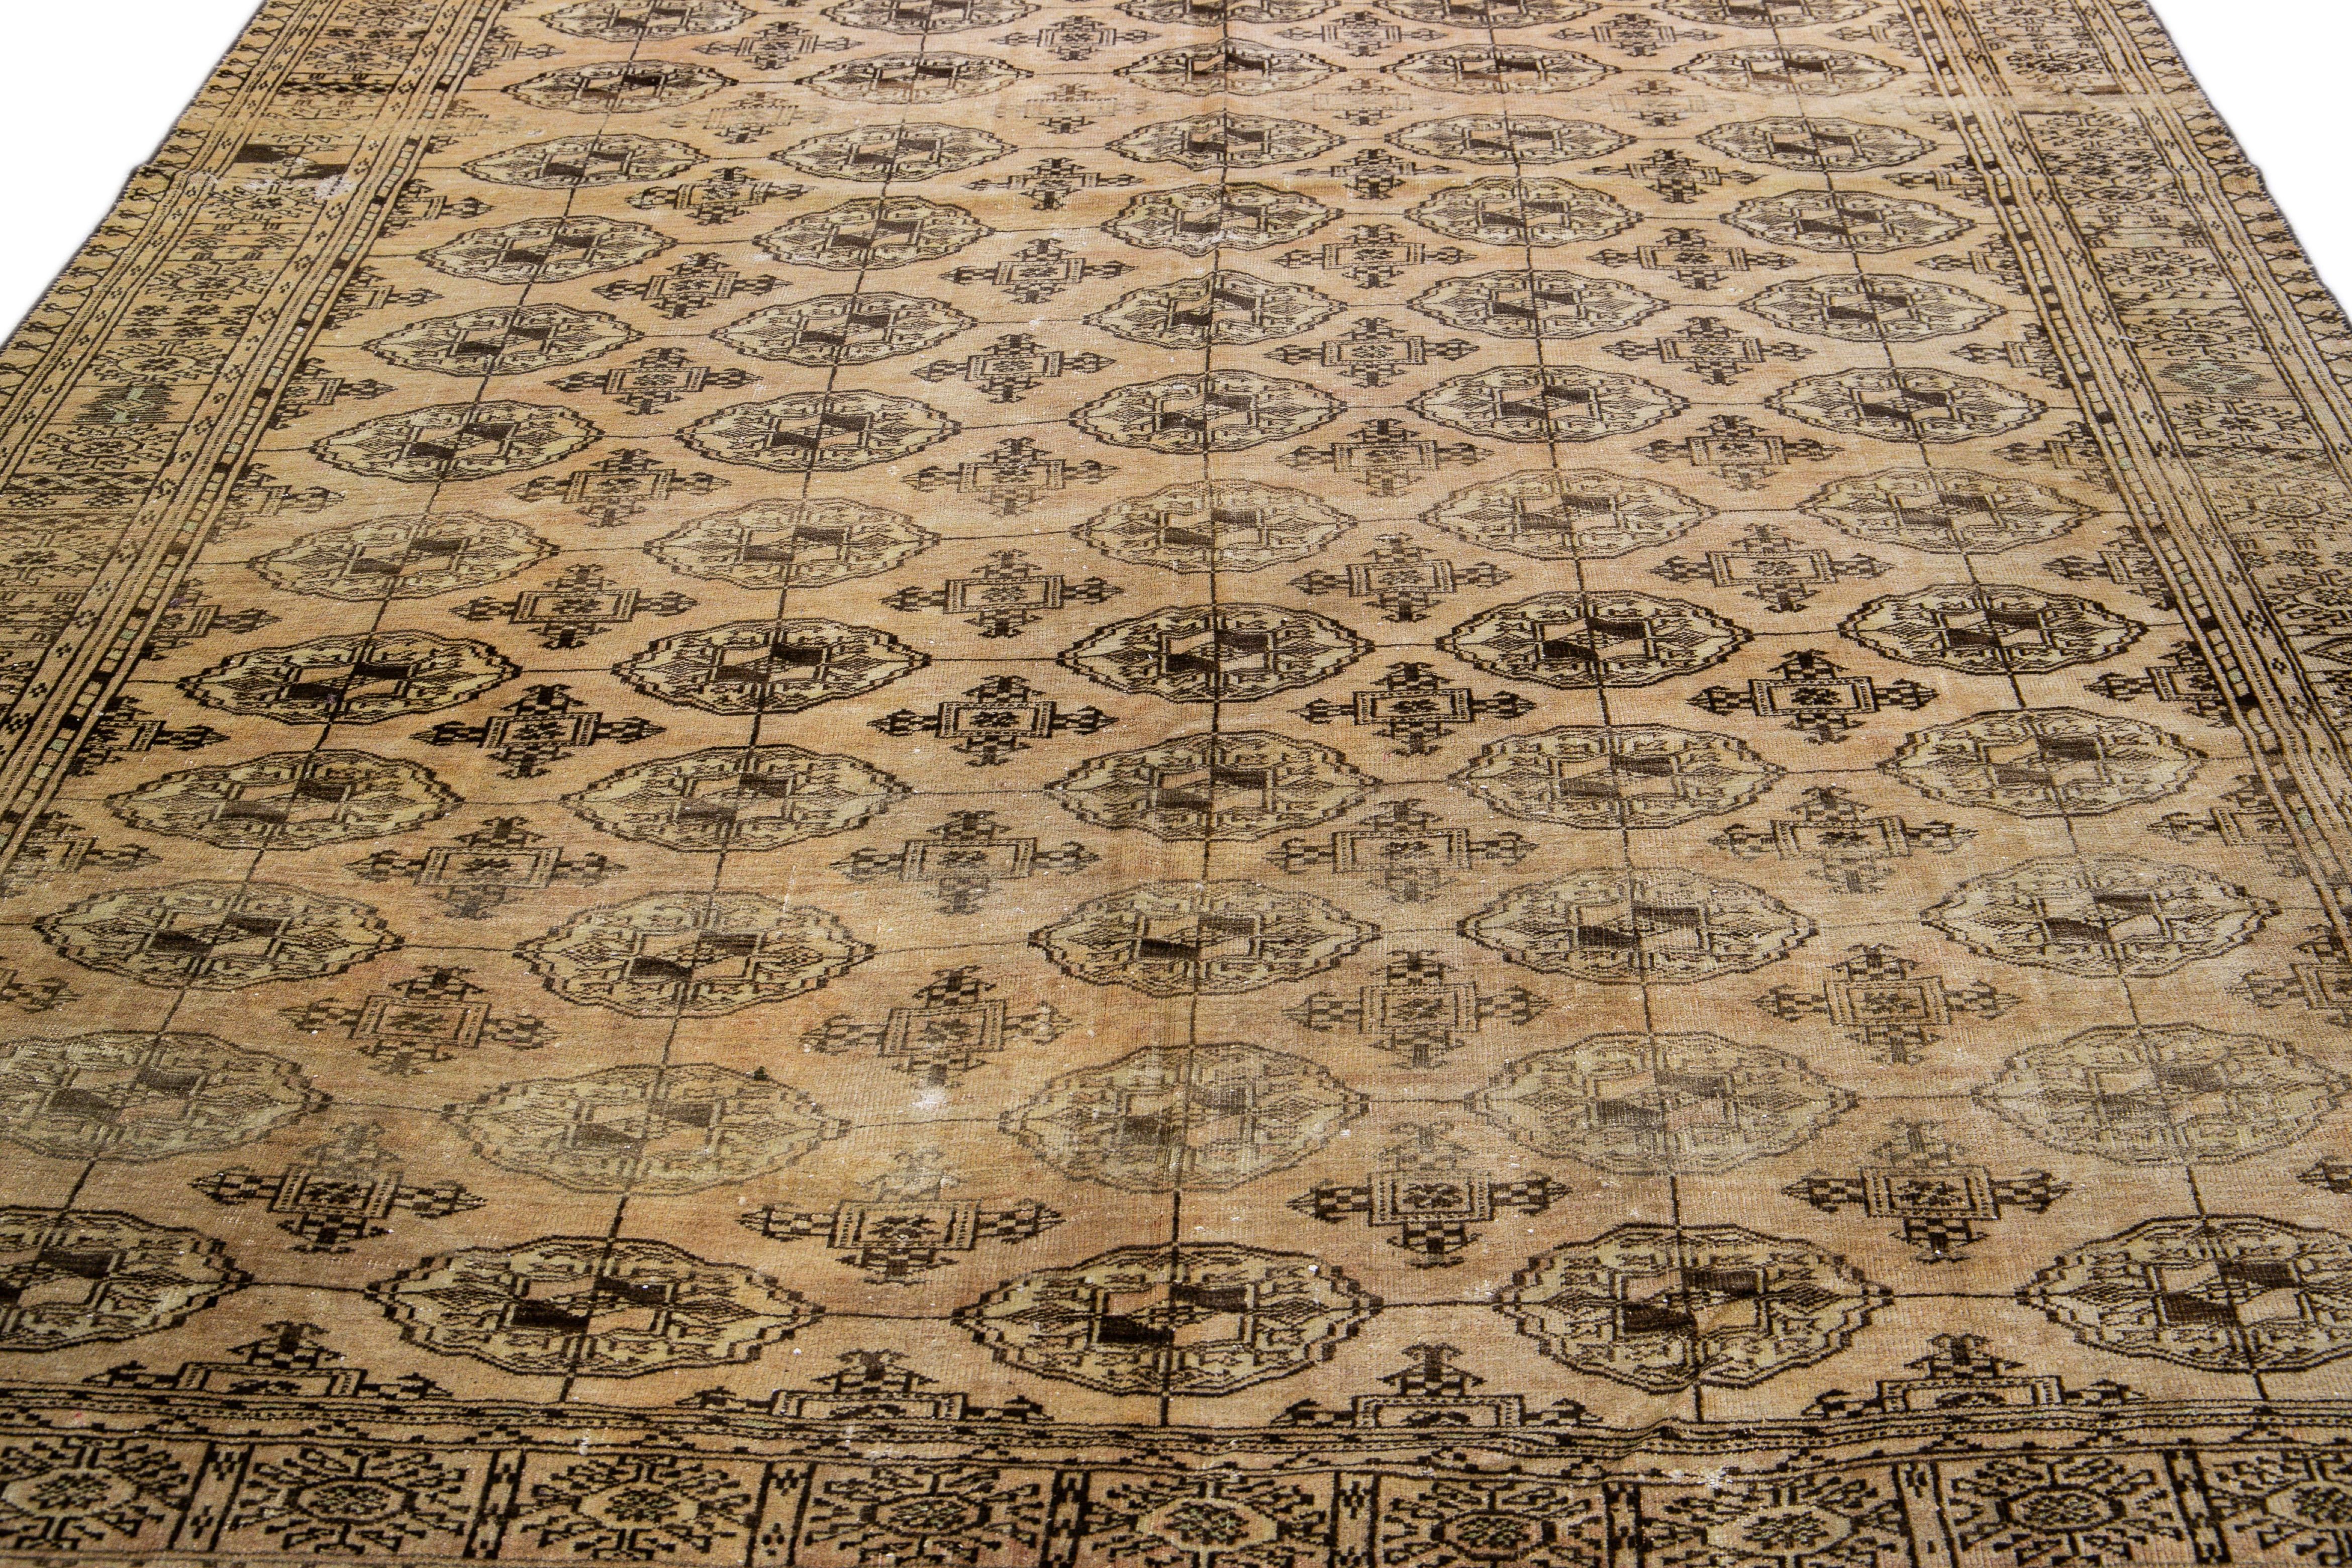 Beautiful antique Turkmen hand-knotted wool rug with a beige field. This piece has brown accents in an all-over geometric pattern design.

This rug measures: 7'4